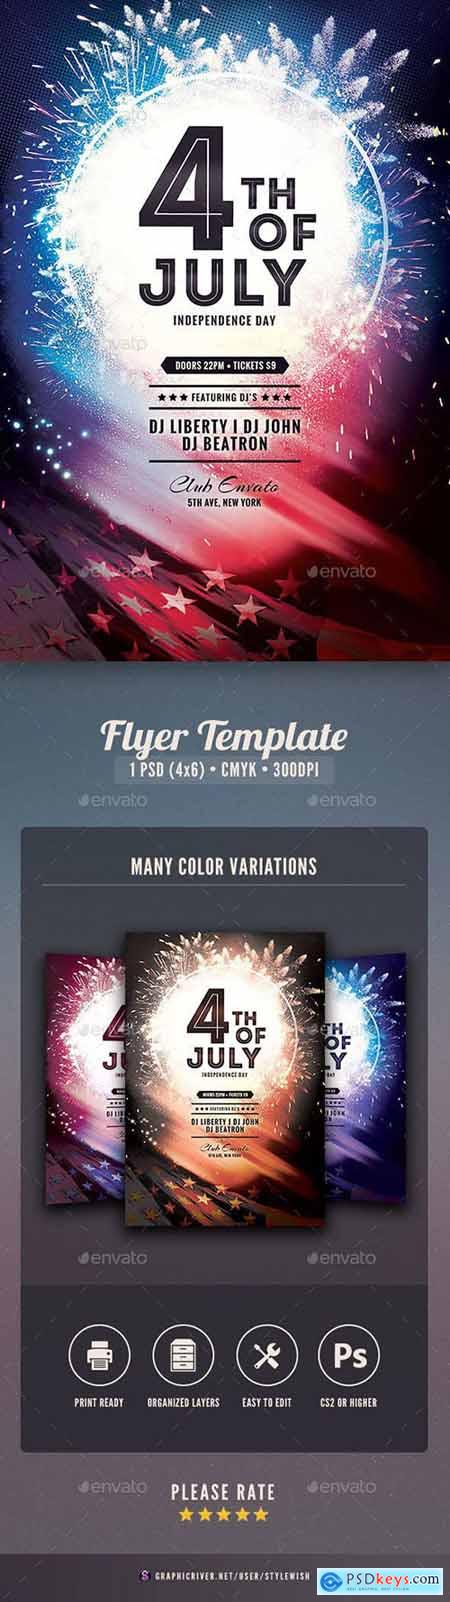 Graphicriver Fourth of July Flyer